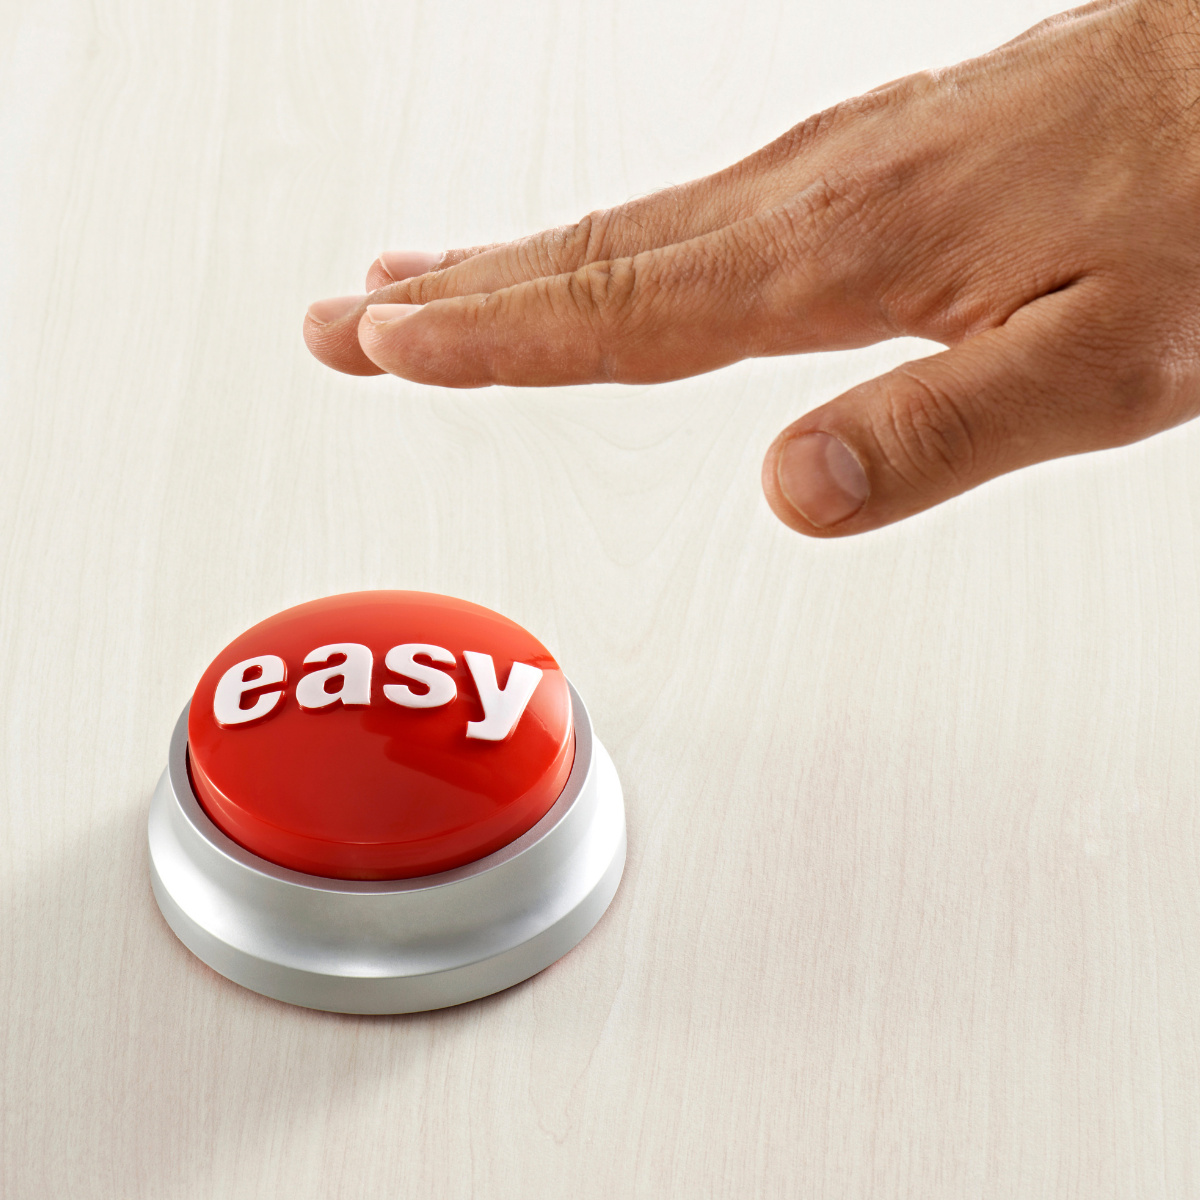 A hand about to push a red button marked "easy"